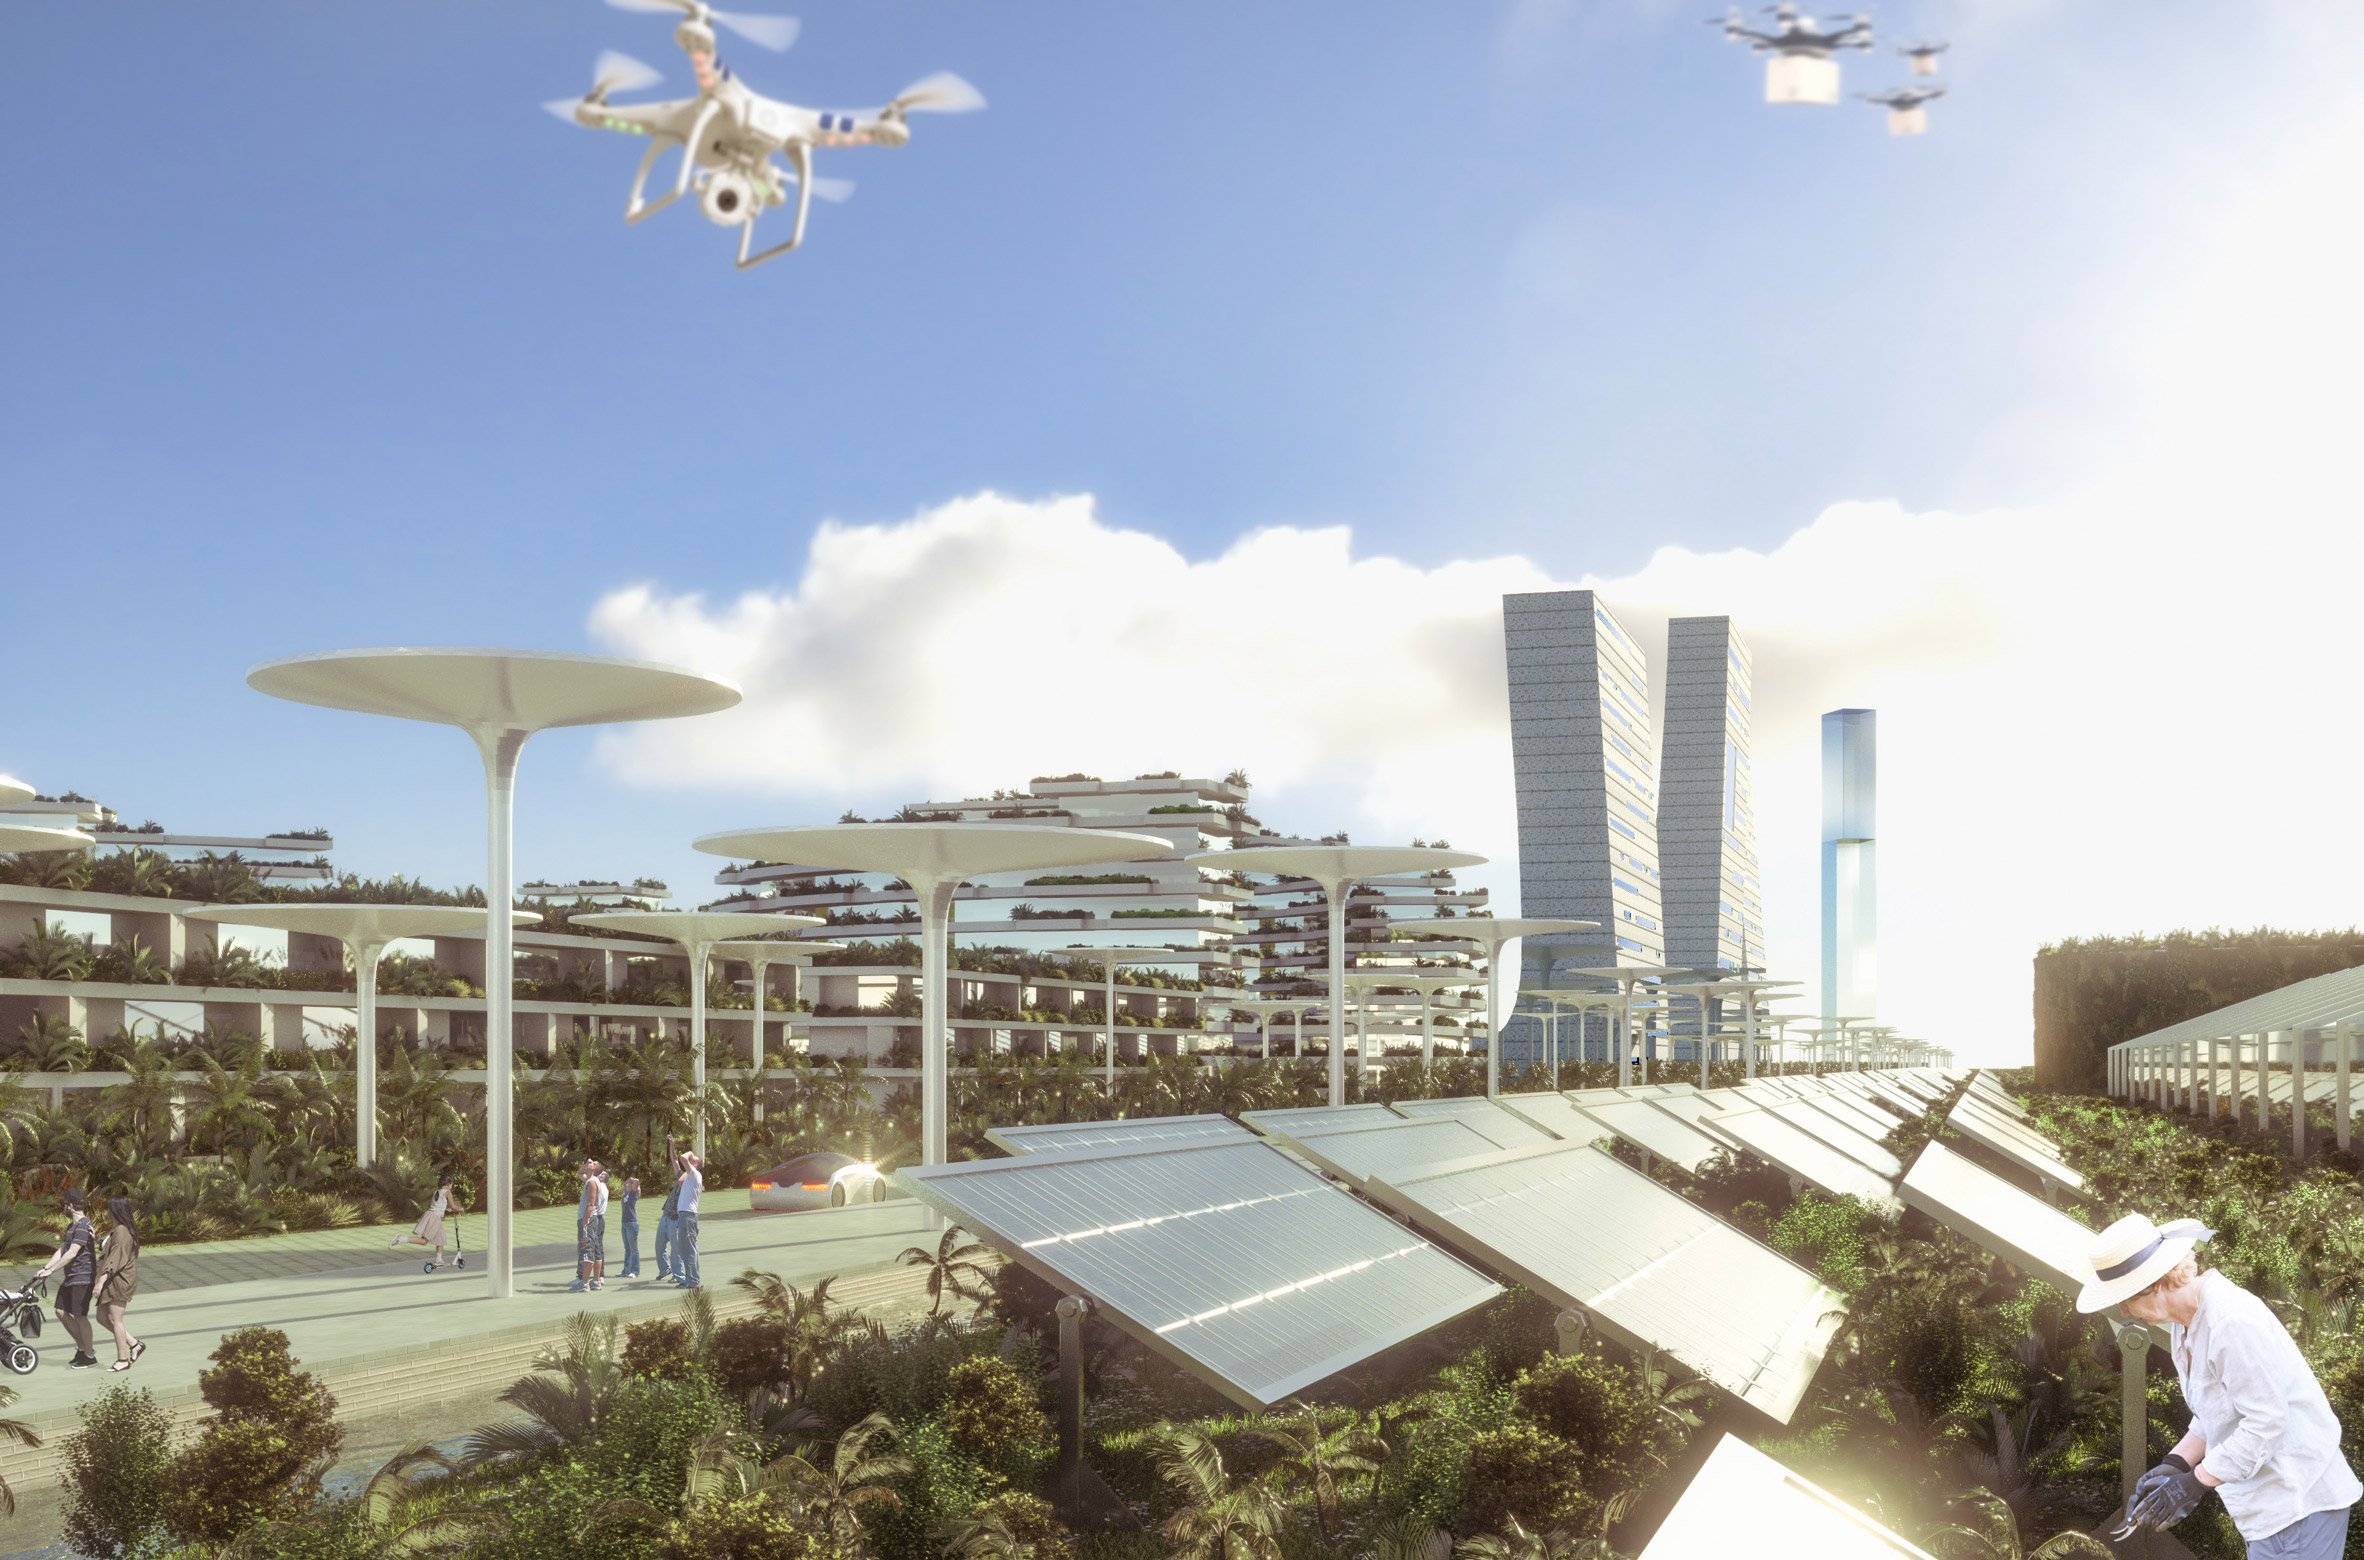 Render of a pedestrian pathway with drones, solar panels and plant-covered buildings